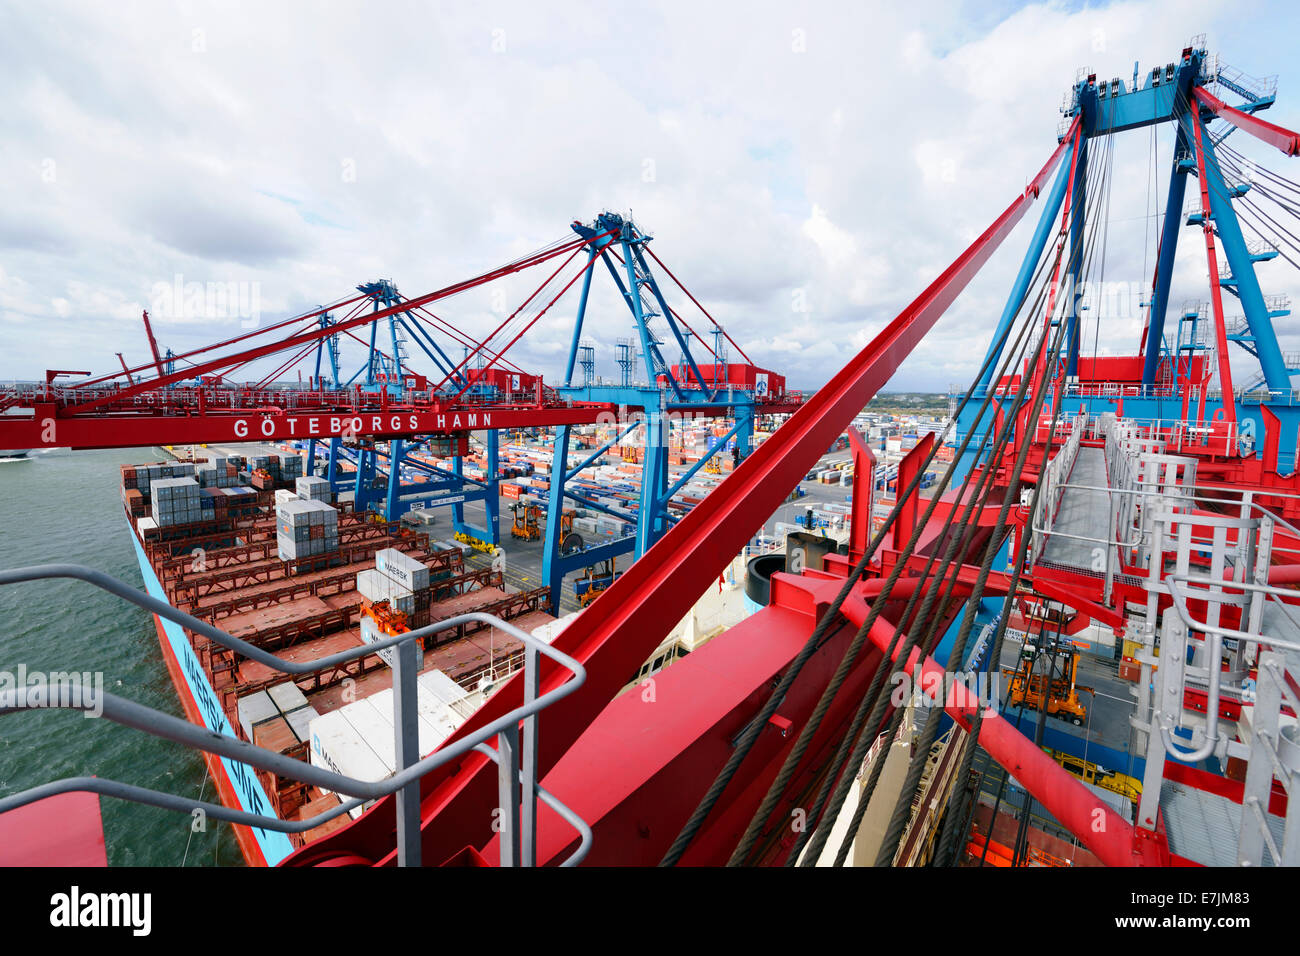 large commercial container port and ships, shot taken from high up on the ship Stock Photo